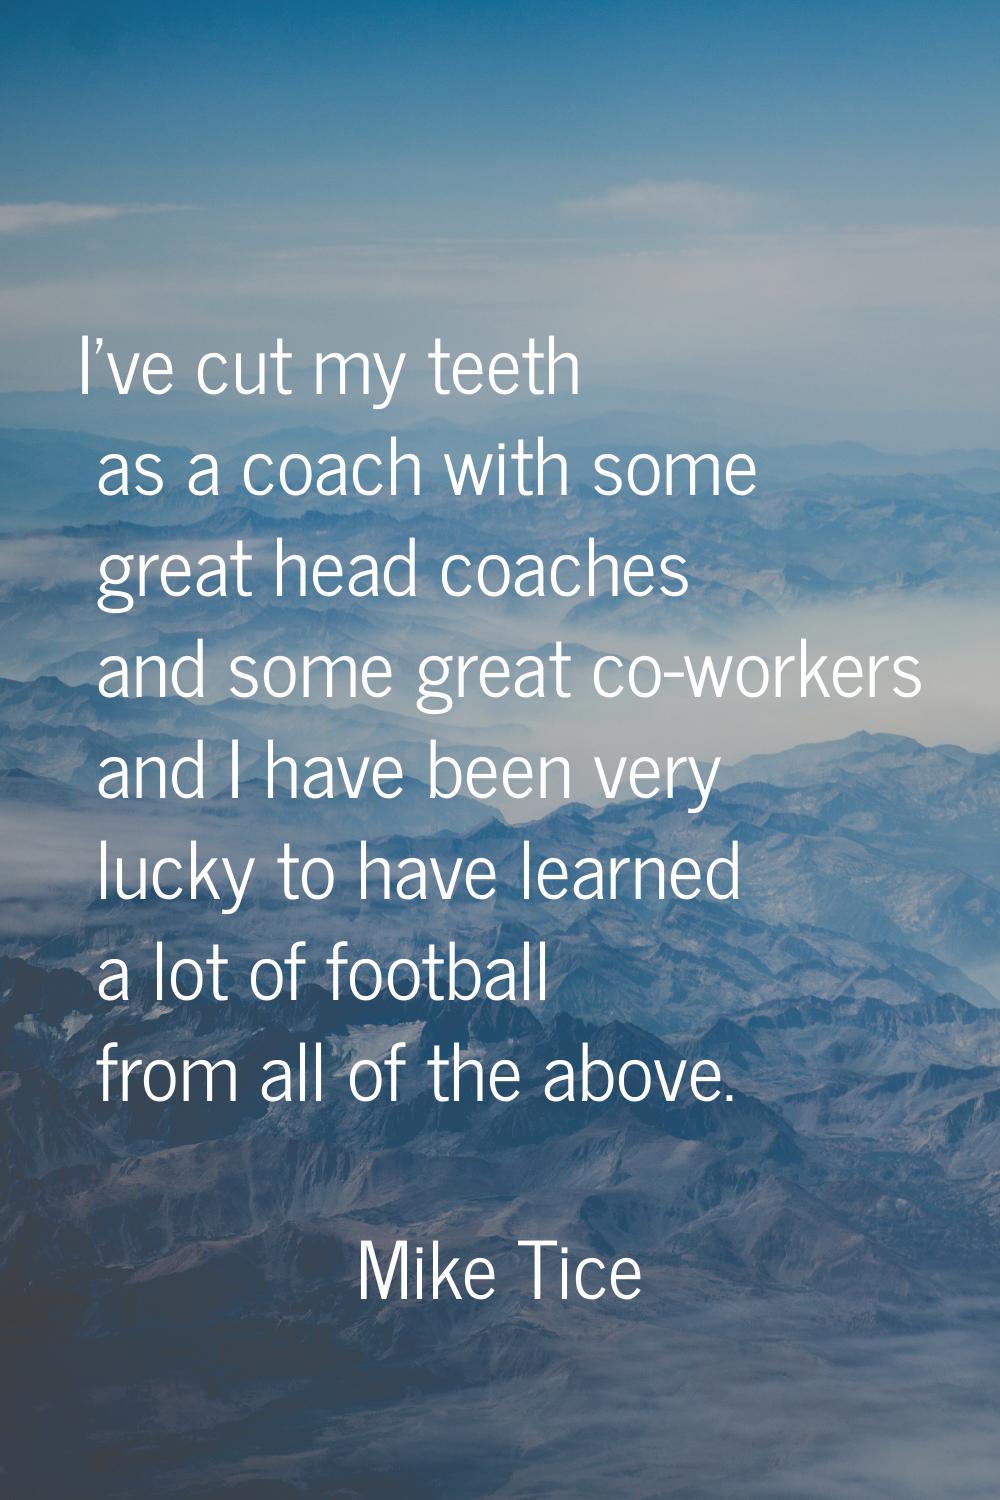 I've cut my teeth as a coach with some great head coaches and some great co-workers and I have been